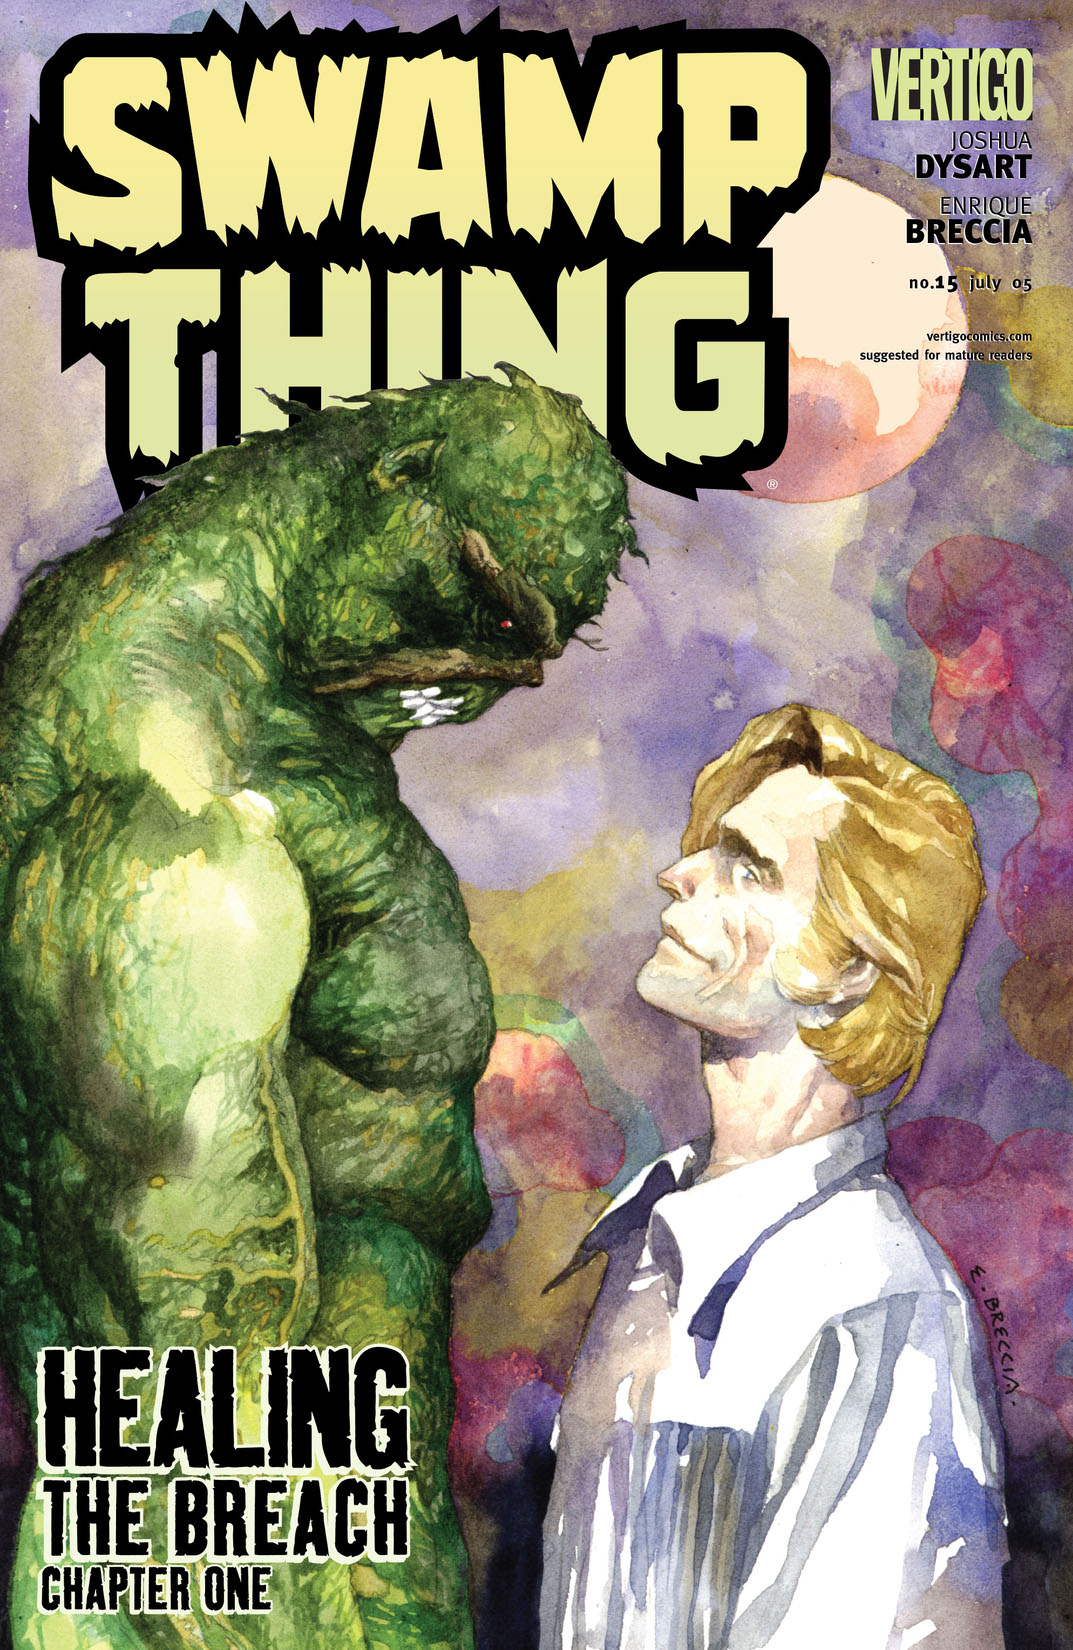 Swamp Thing (2004-) #15 preview images